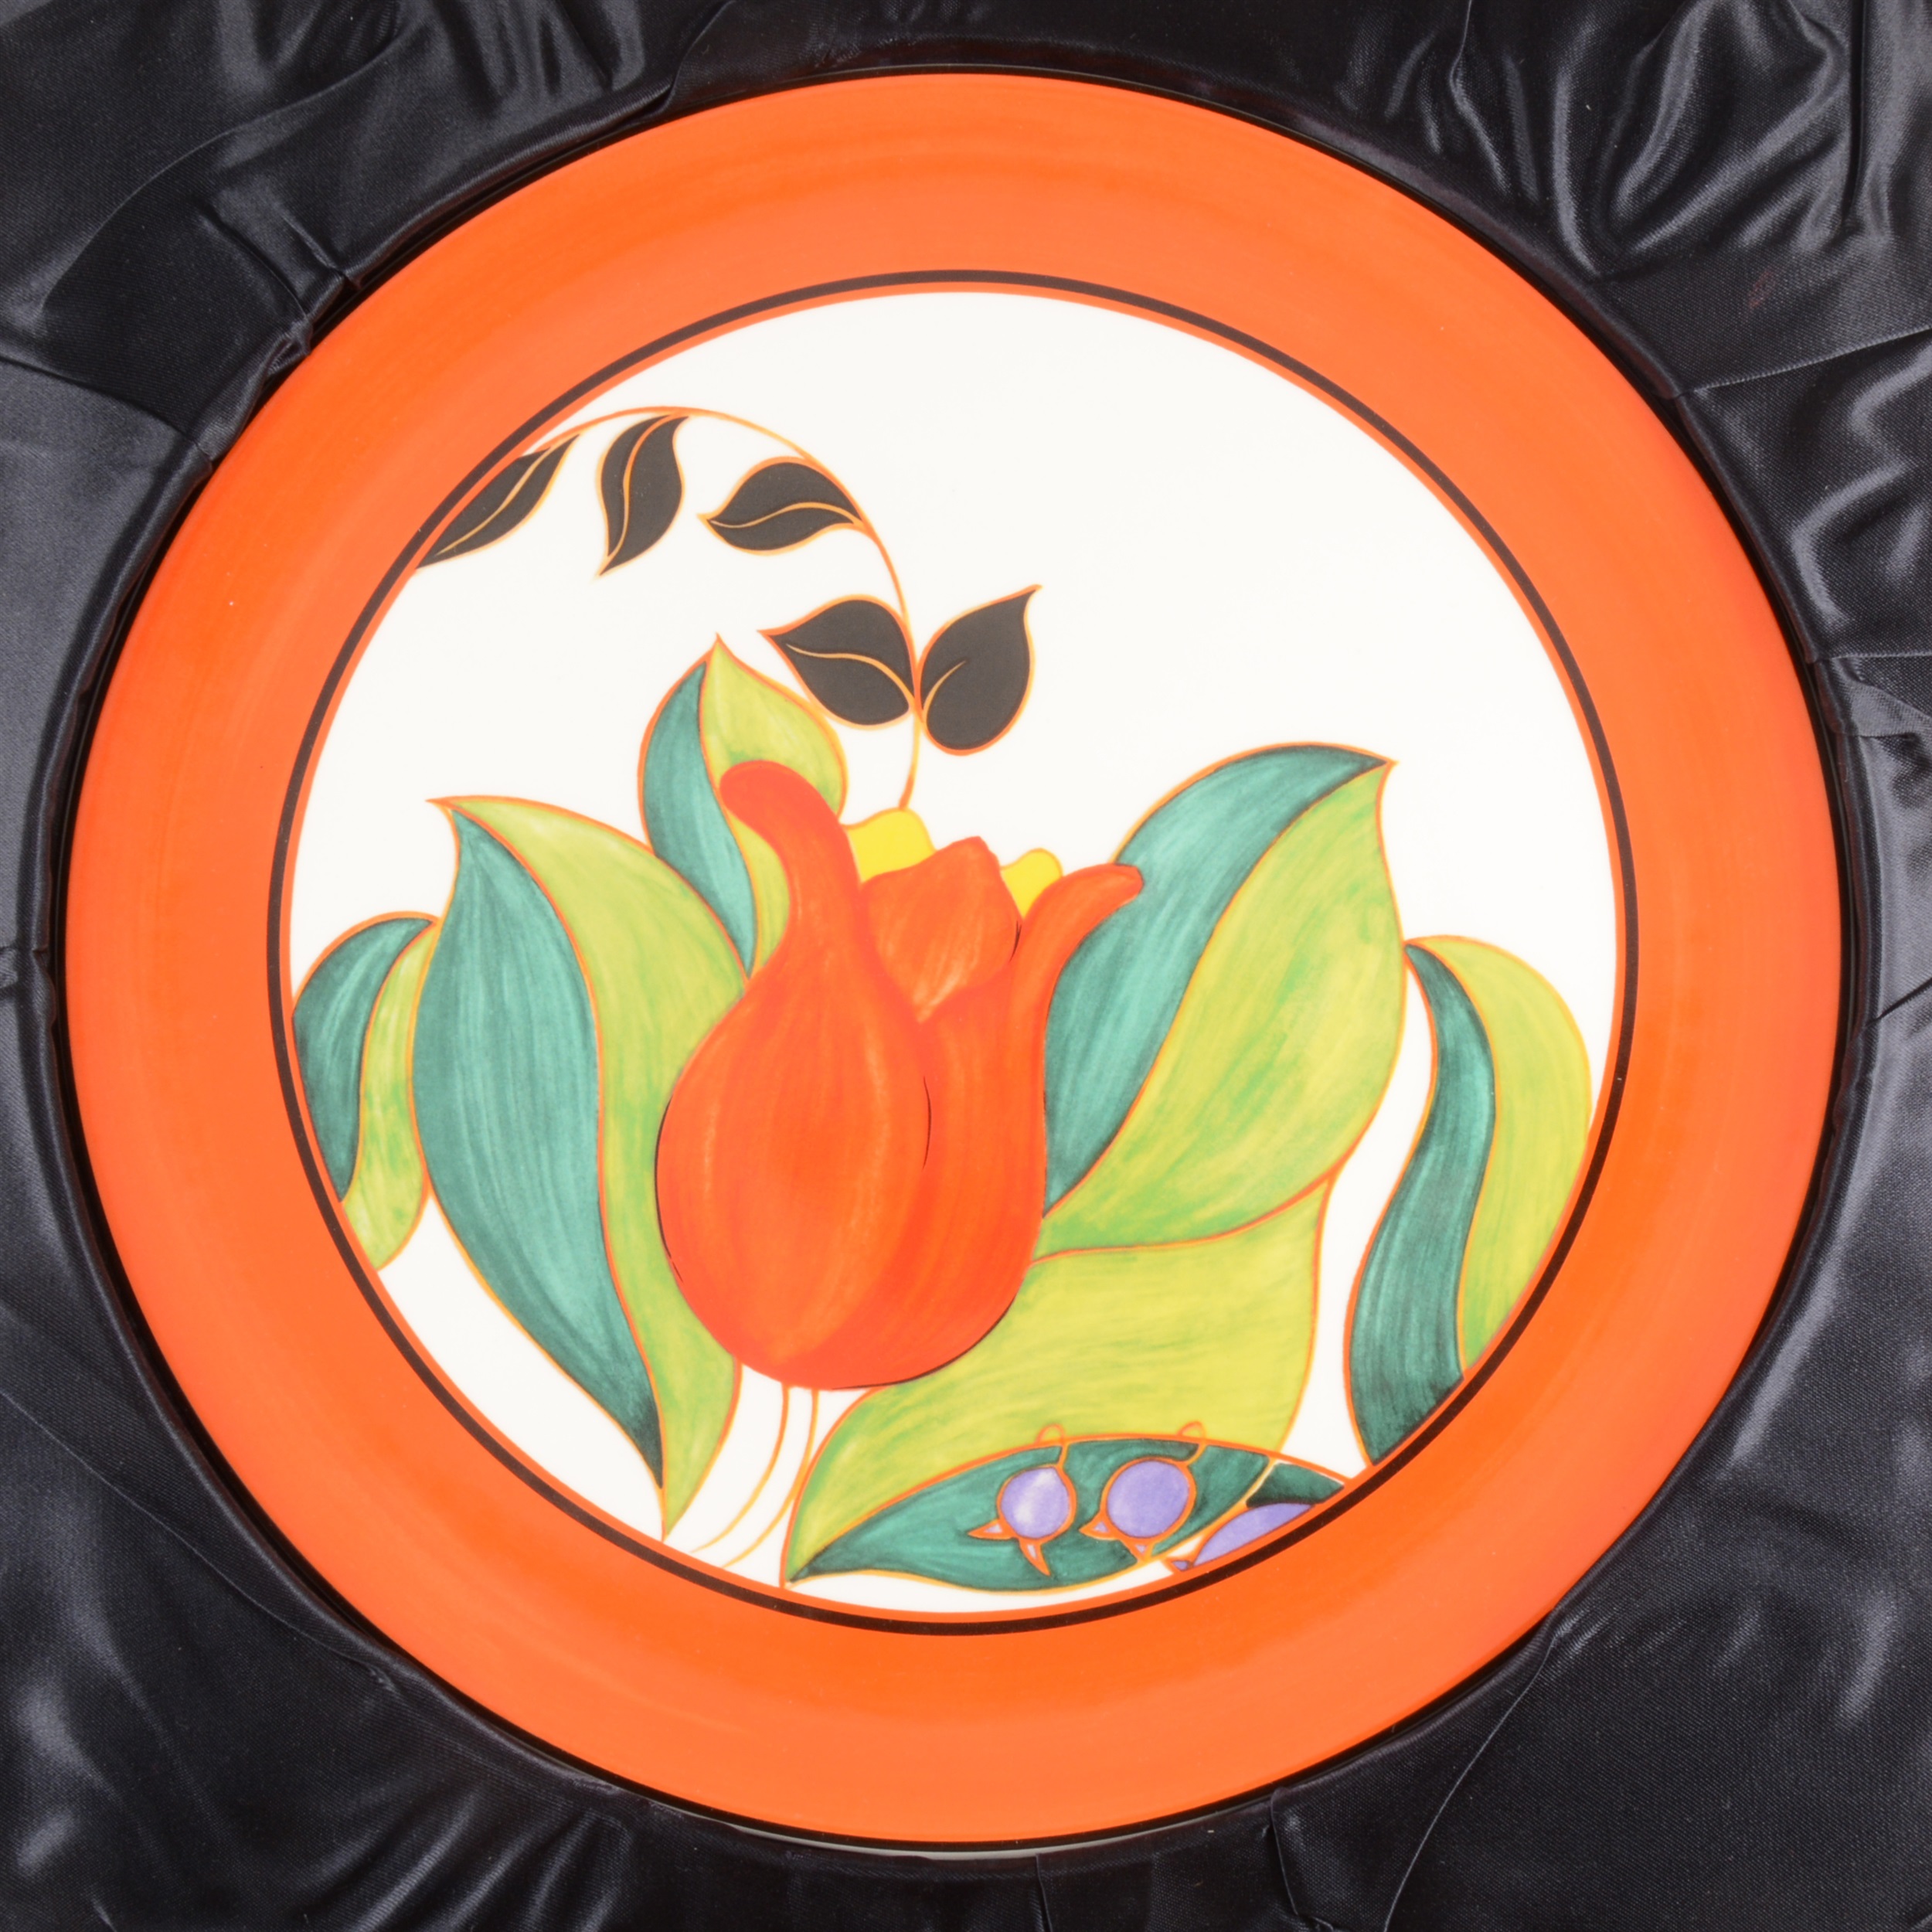 A limited edition Wedgwood Clarice Cliff 'Red Tulip' plate, 1000/1999.